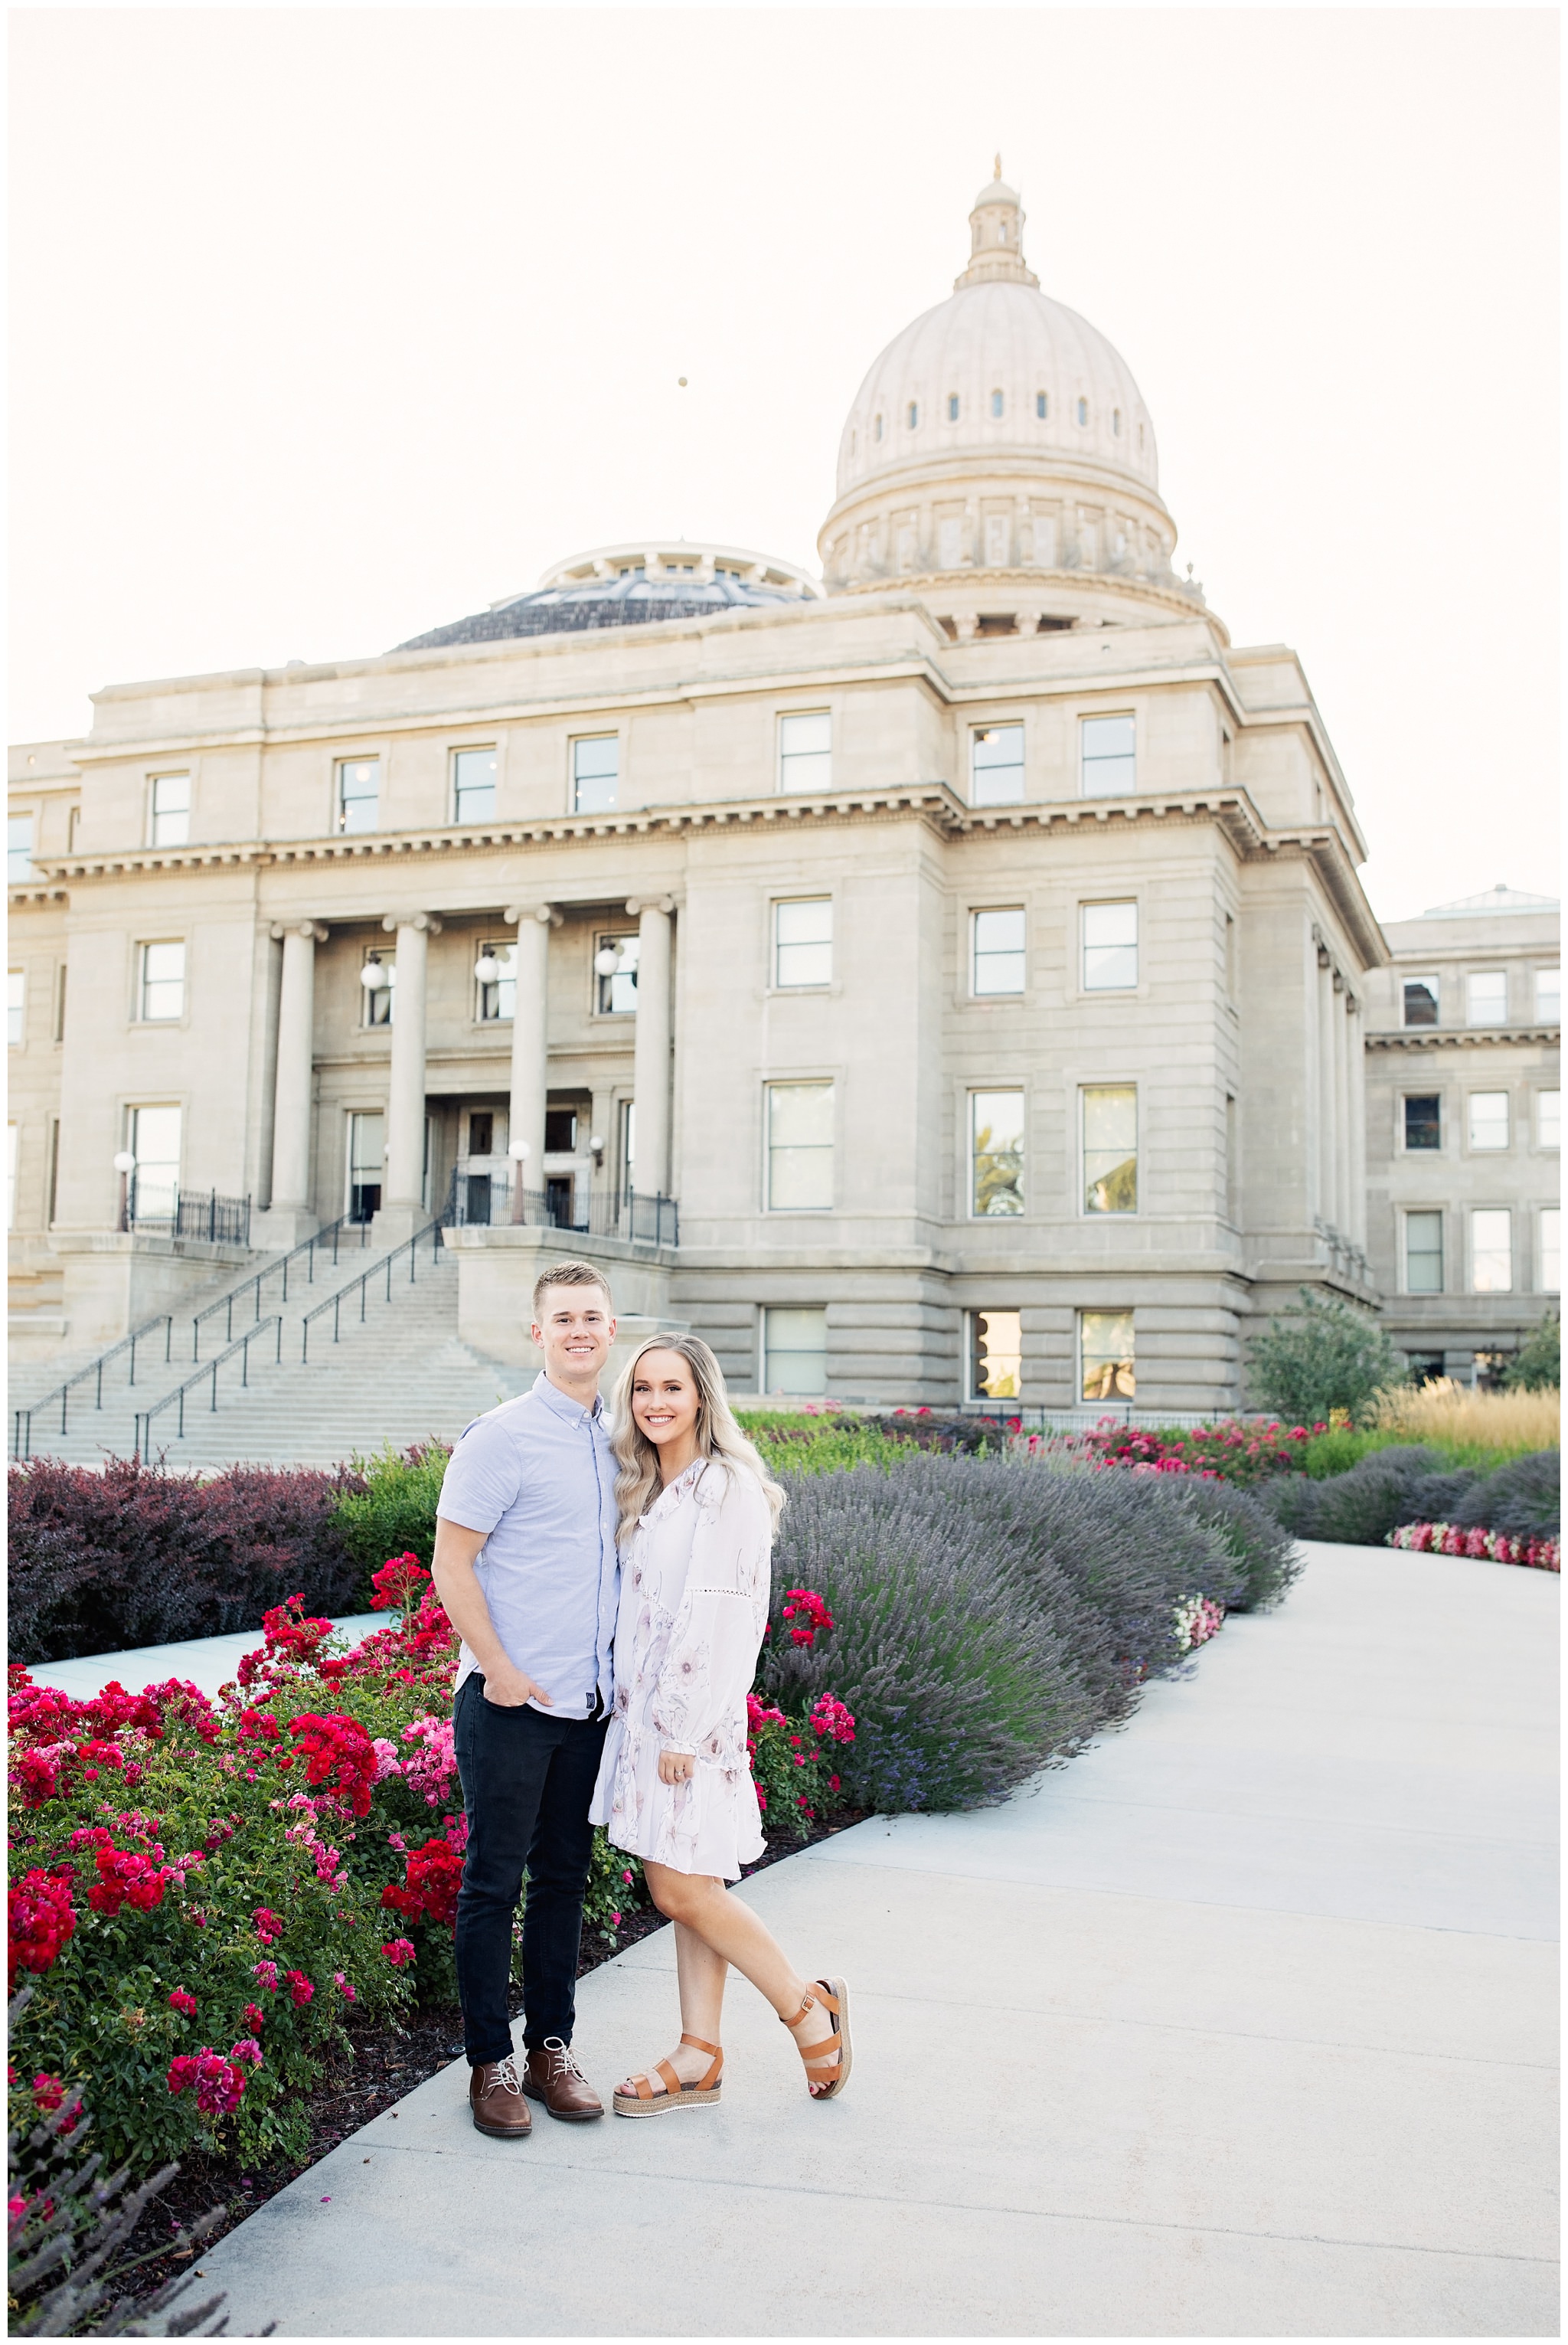 Summer engagement session in Idaho